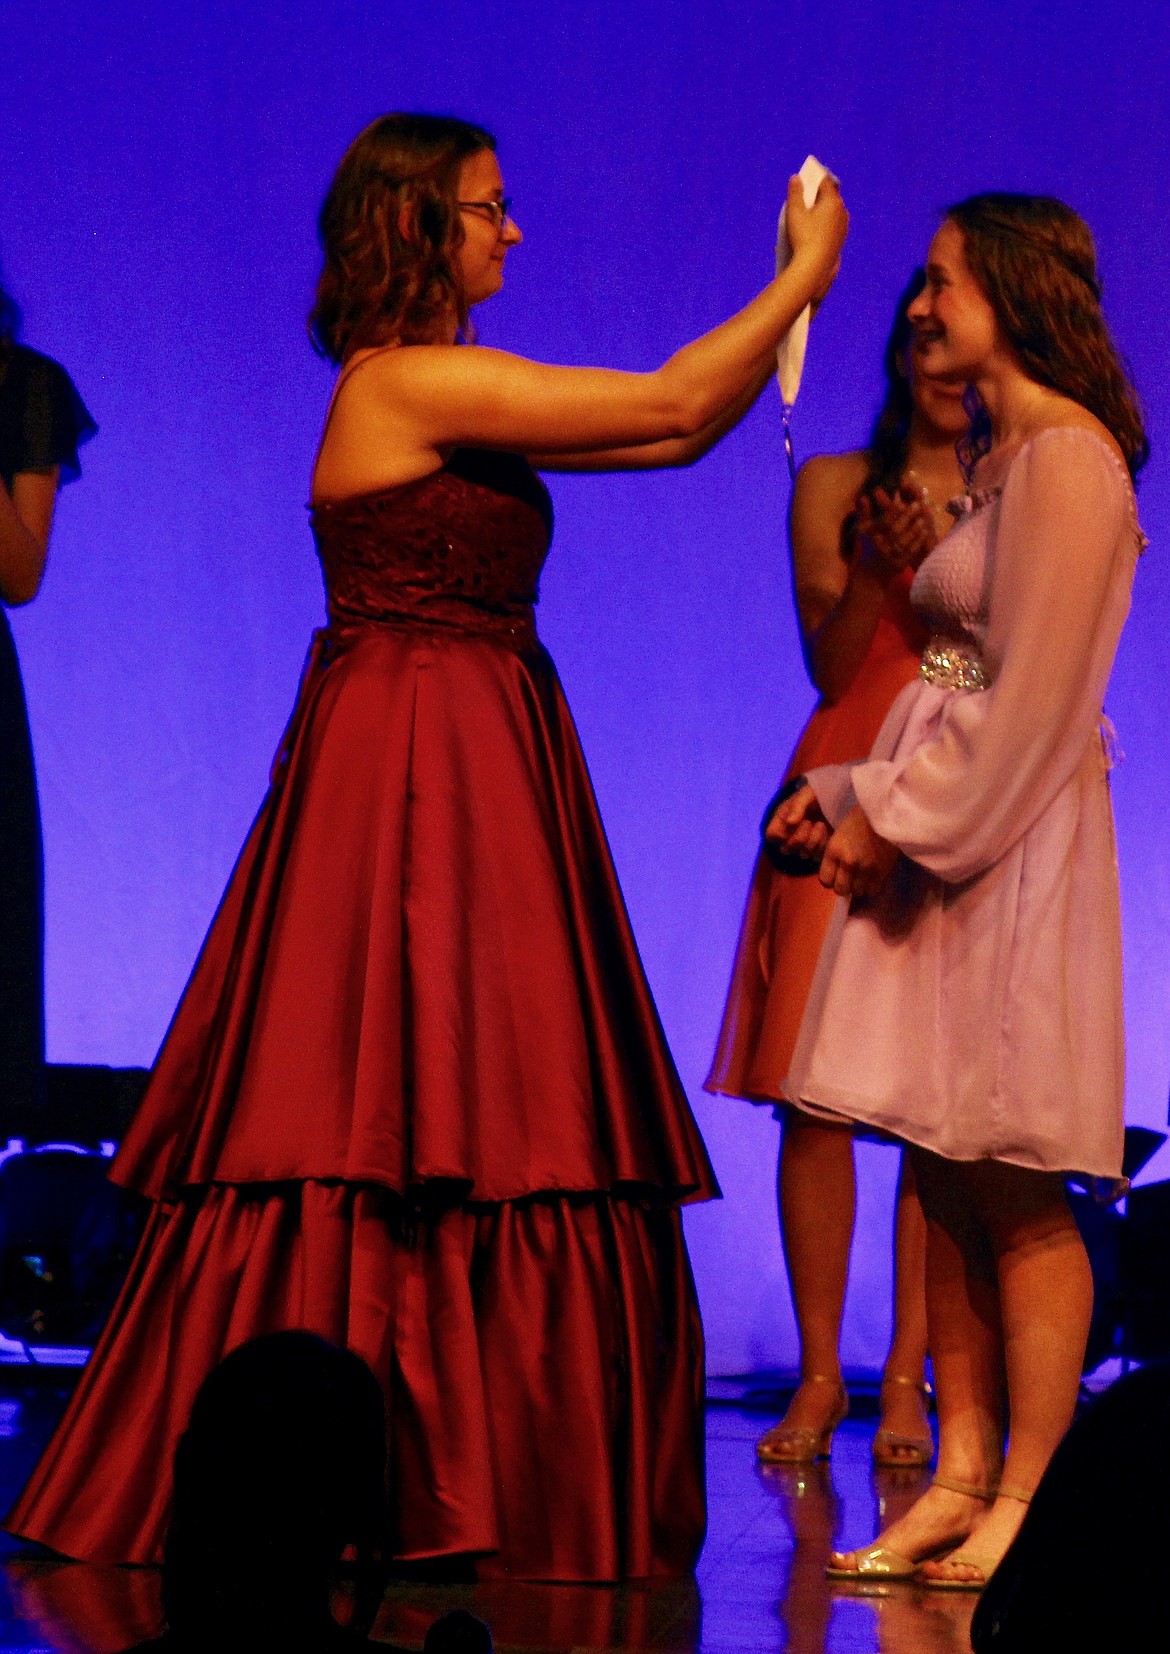 (left) Cali Iacolucci bestows the DYW medal to Leah Moellmer.